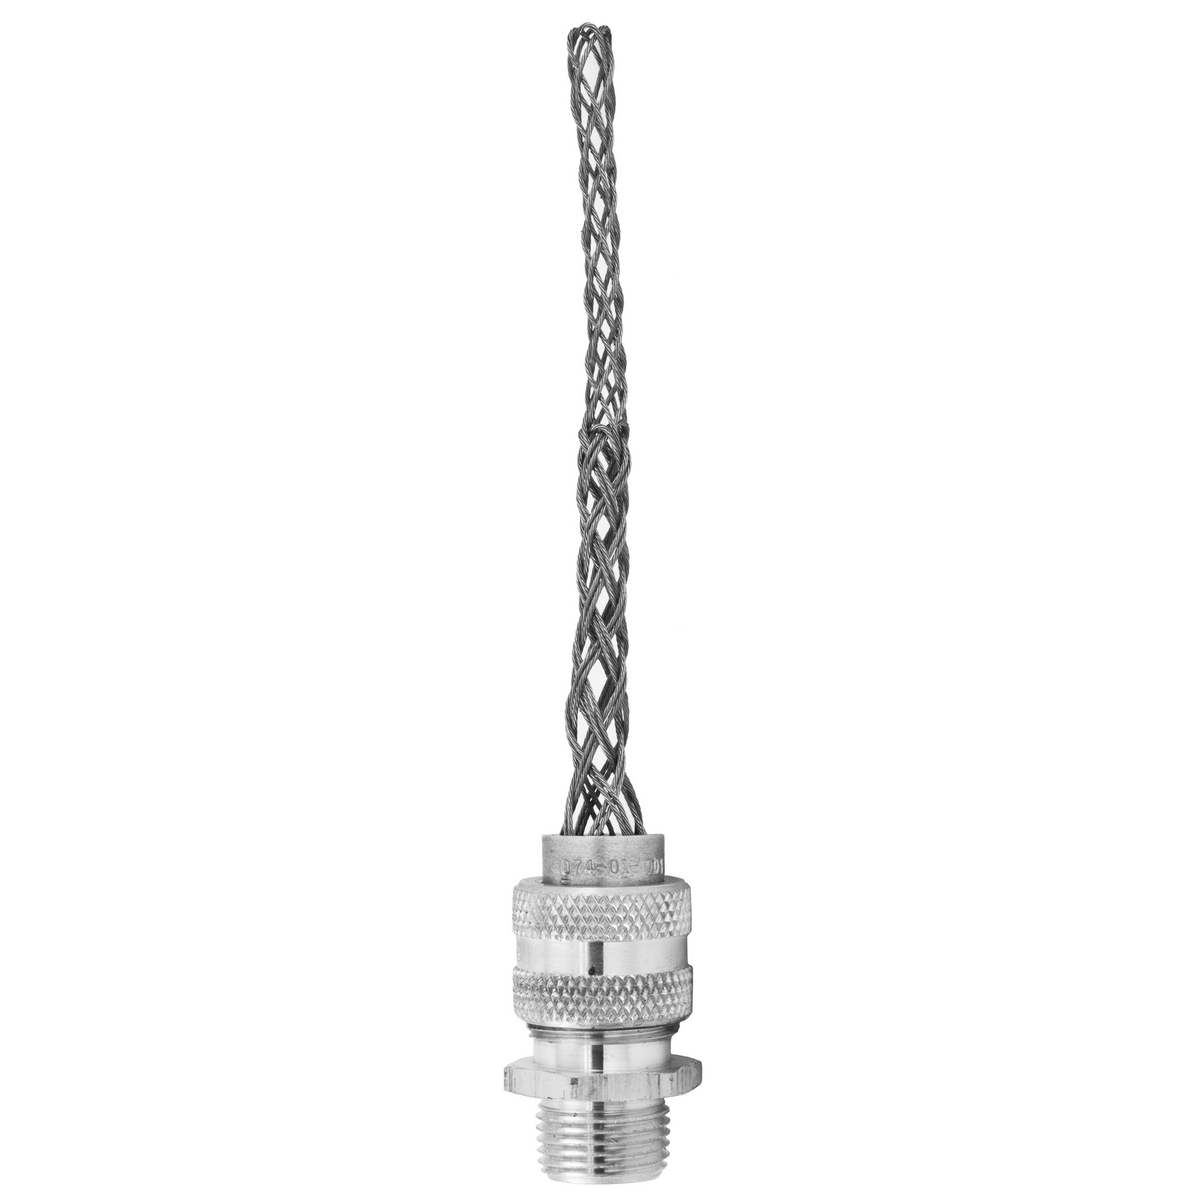 Woodhead 36263 Cable Strain Relief, Straigh Male, Deluxe Cord Grip,  Aluminum Body, Stainless Steel Mesh, 3/4 NPT Thread Size, .625-.750 Cable